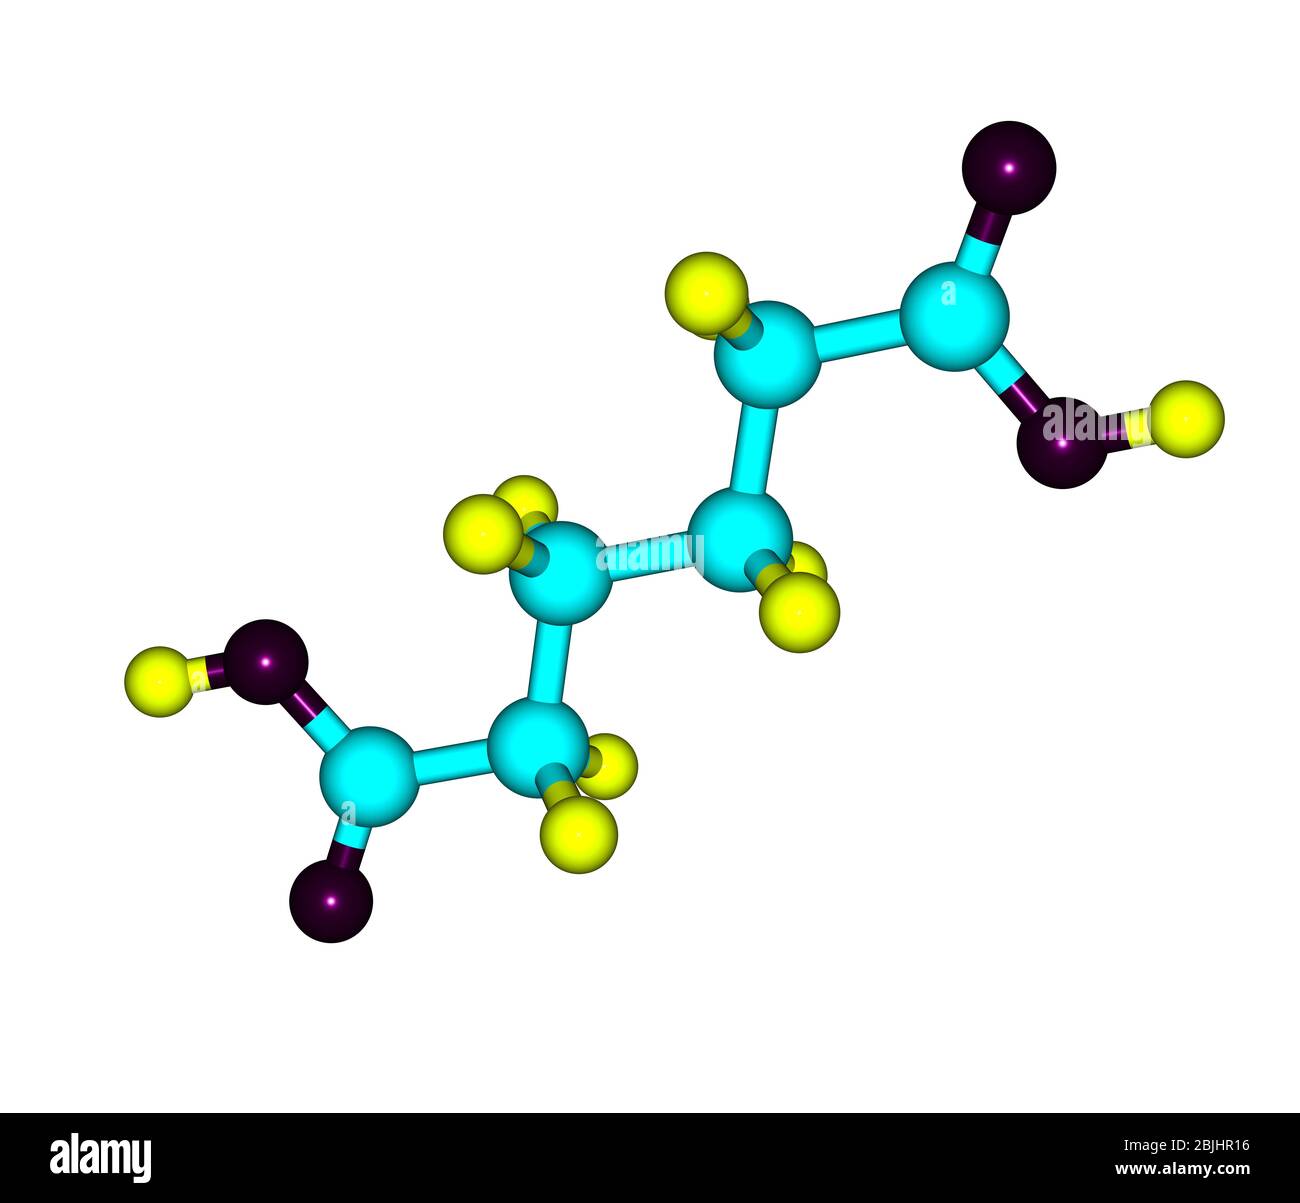 Adipic acid is the organic compound with the formula (CH2)4(COOH)2. It is a  precursor for the production of nylon Stock Photo - Alamy